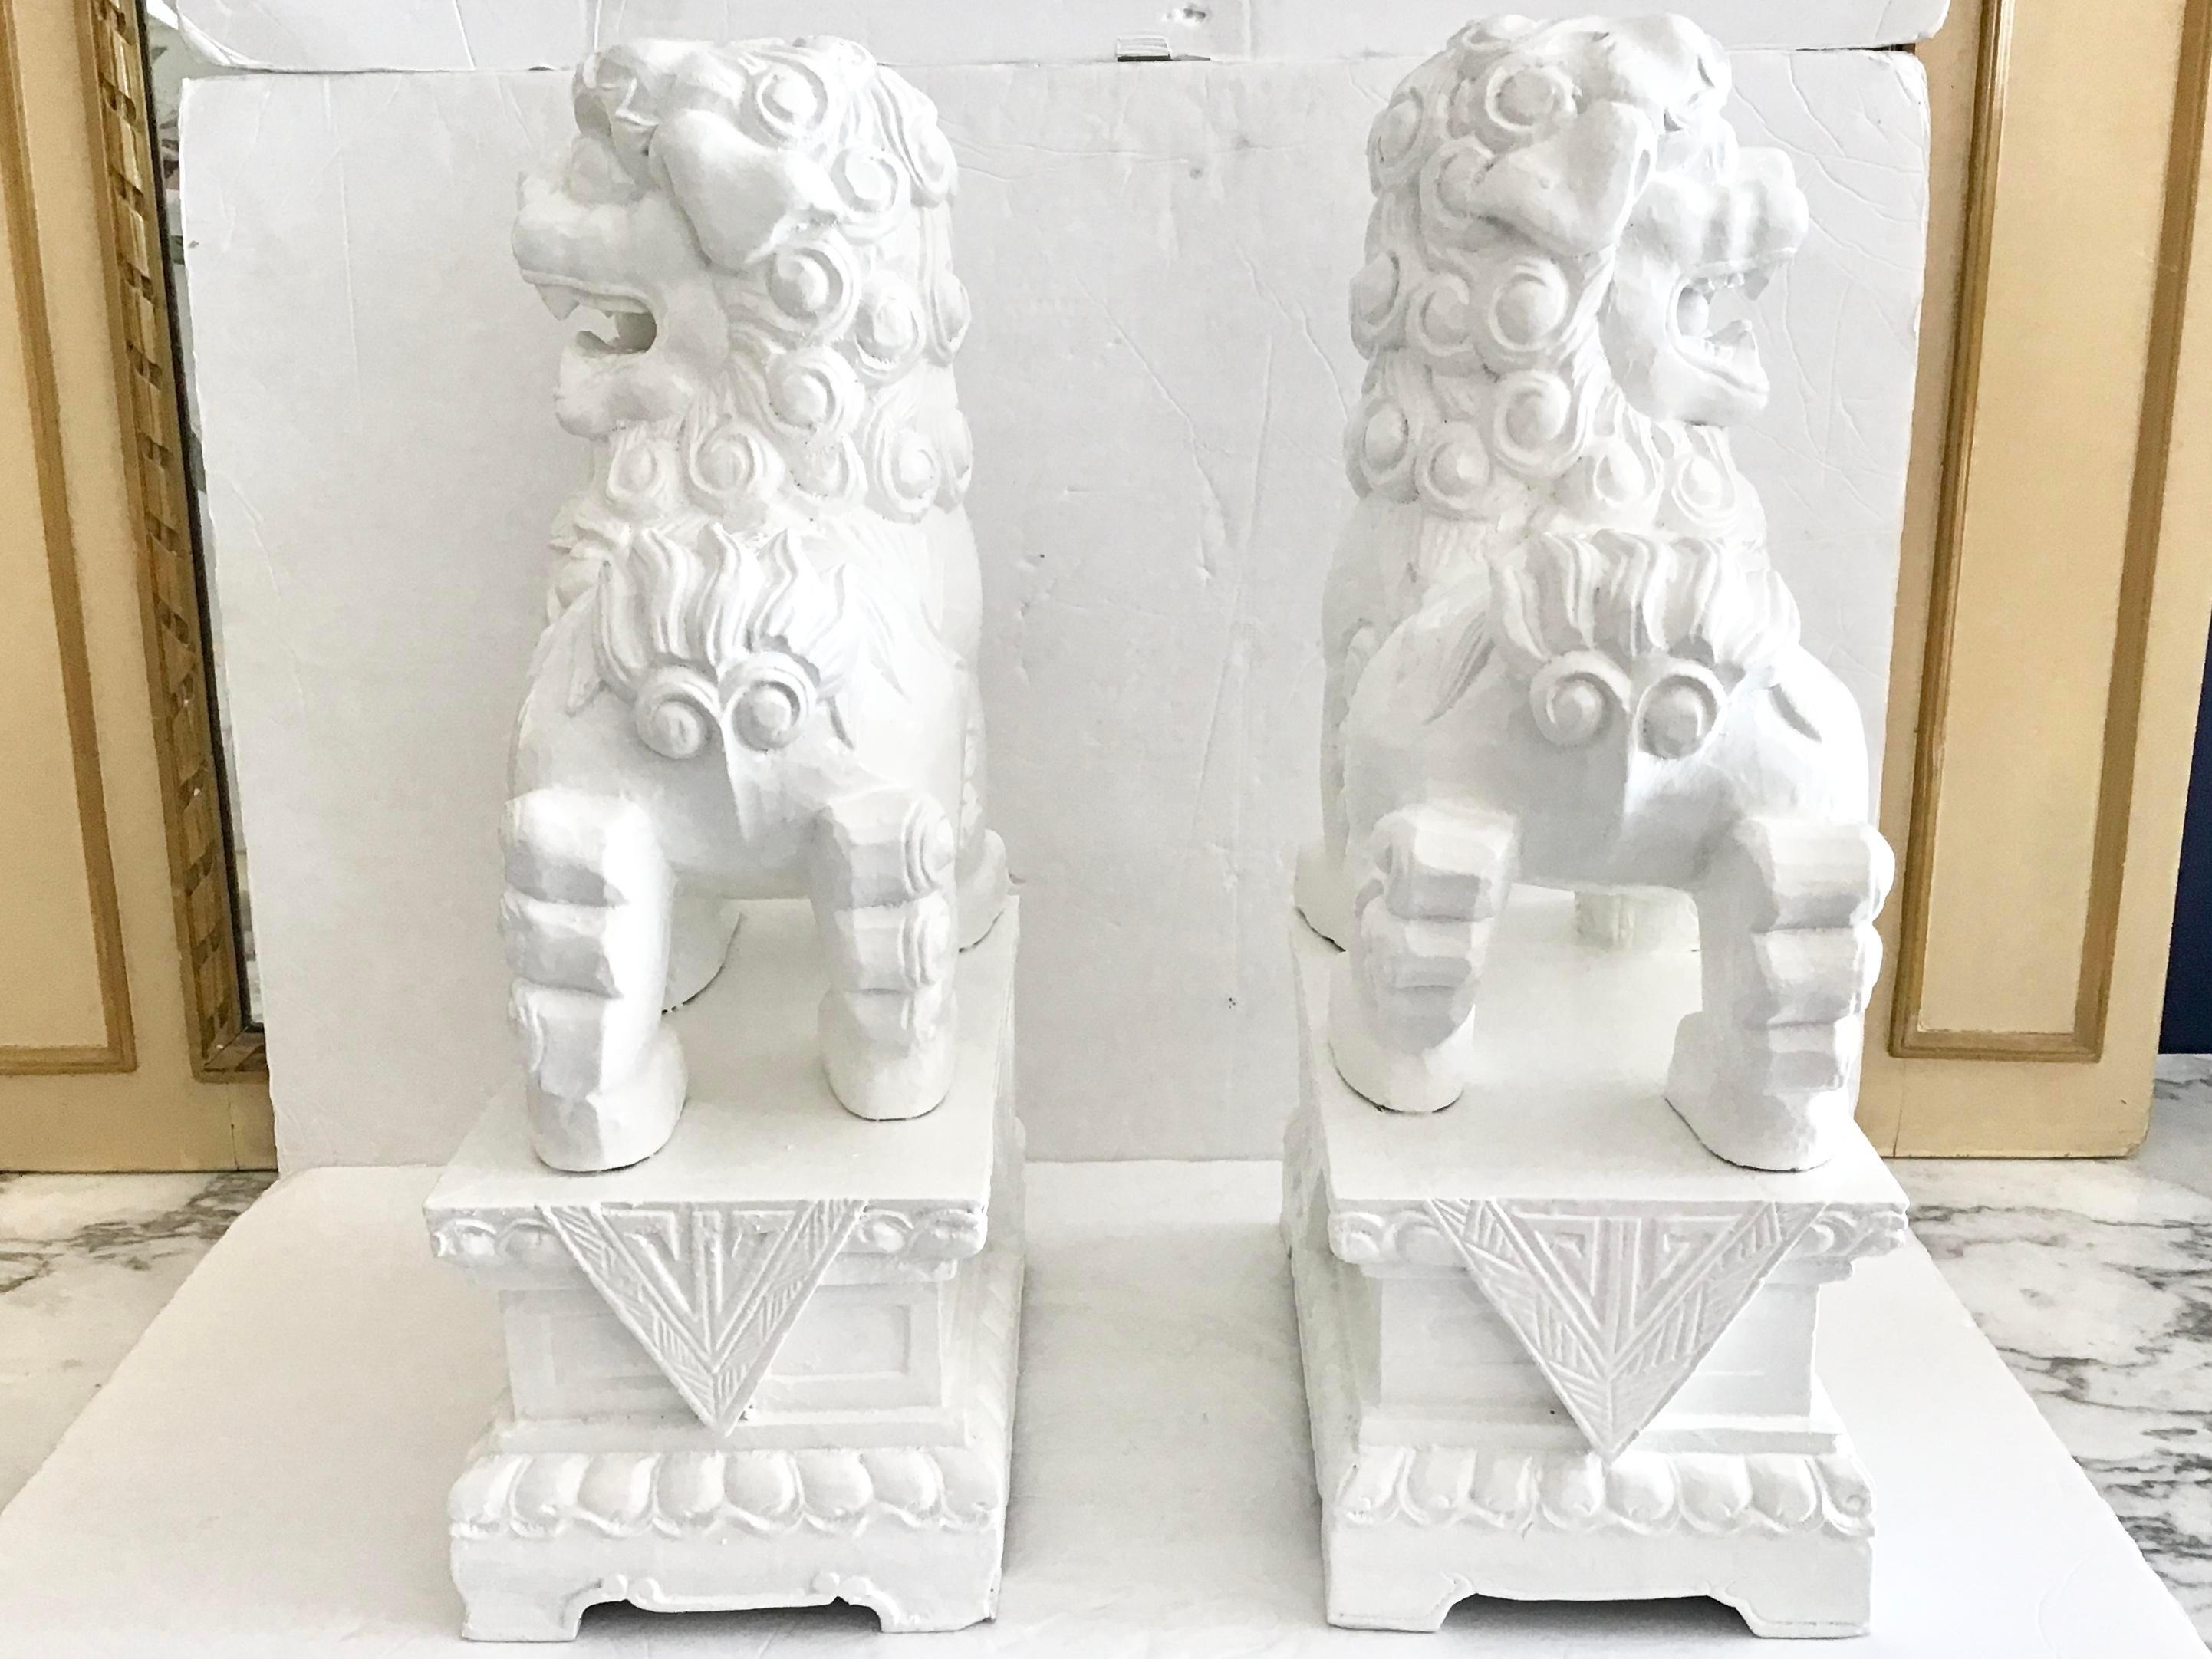 Chinoiserie White Foo Dogs Carved in Wood Base Geometrical Figures, a Pair